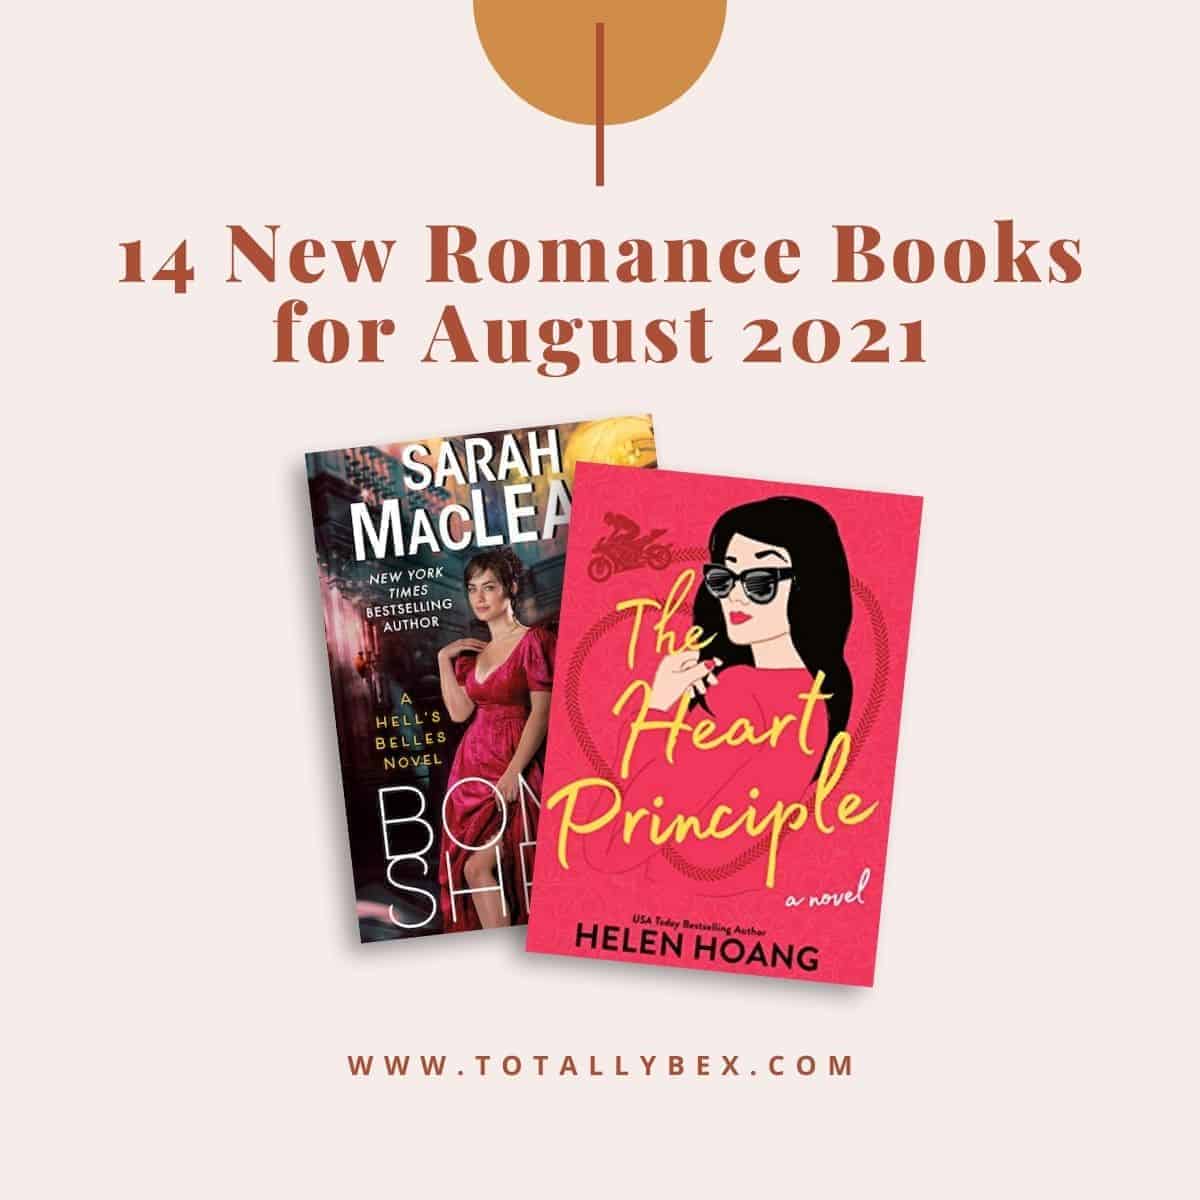 14 New Romance Books for August 2021